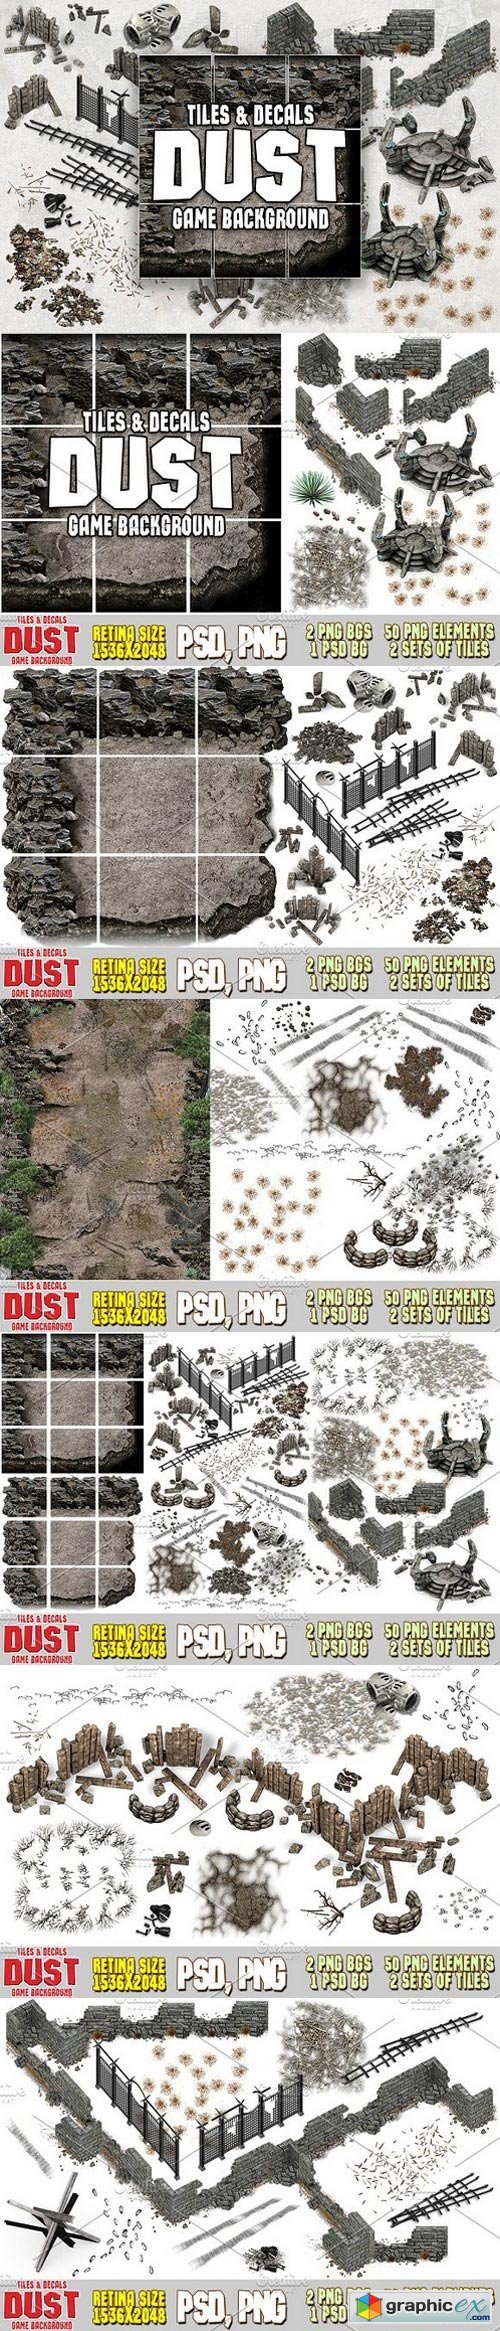 DUST 2D MAP TILES AND DECALS